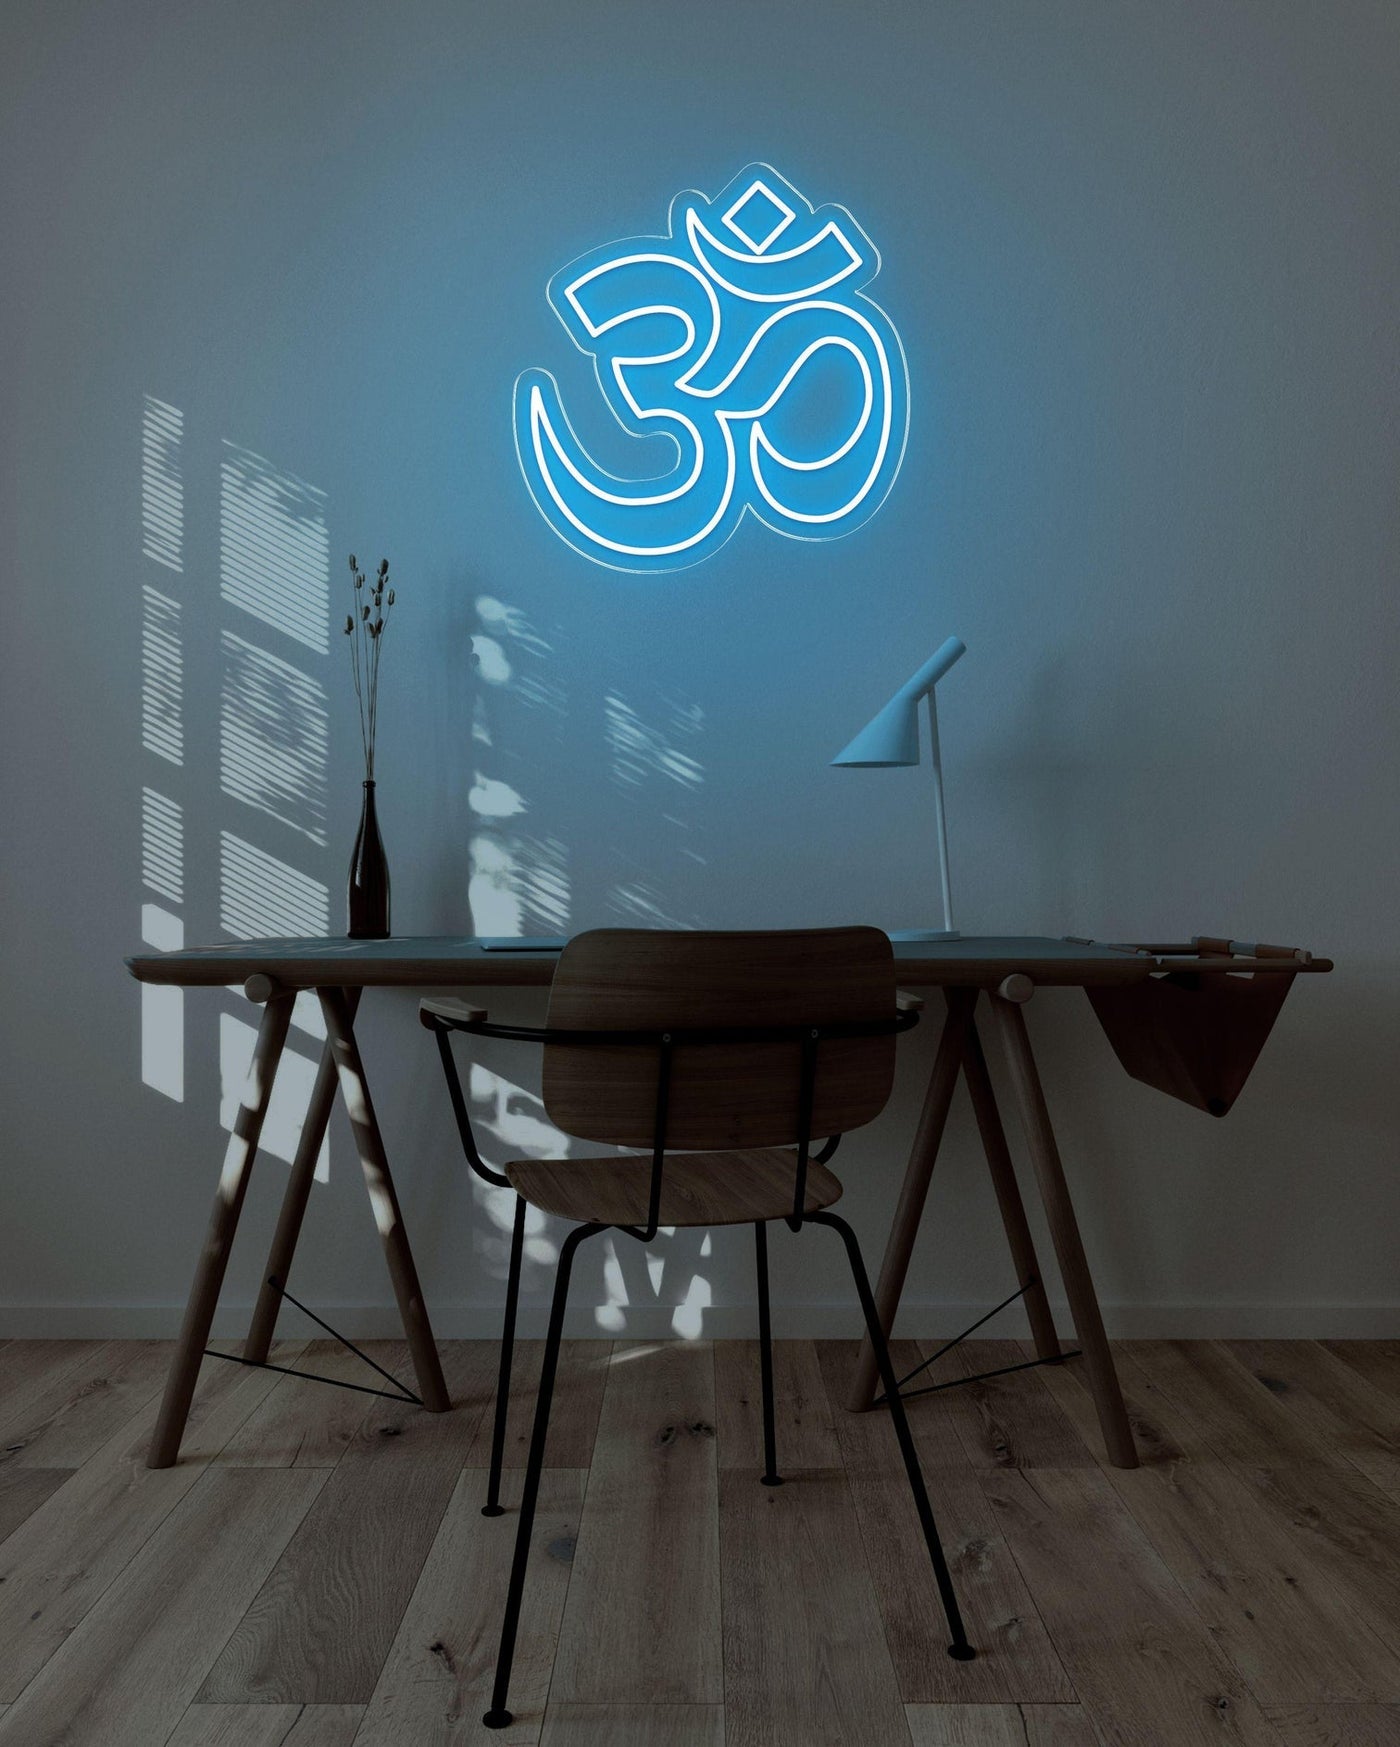 OM LED neon sign - 22inch x 22inchIce Blue